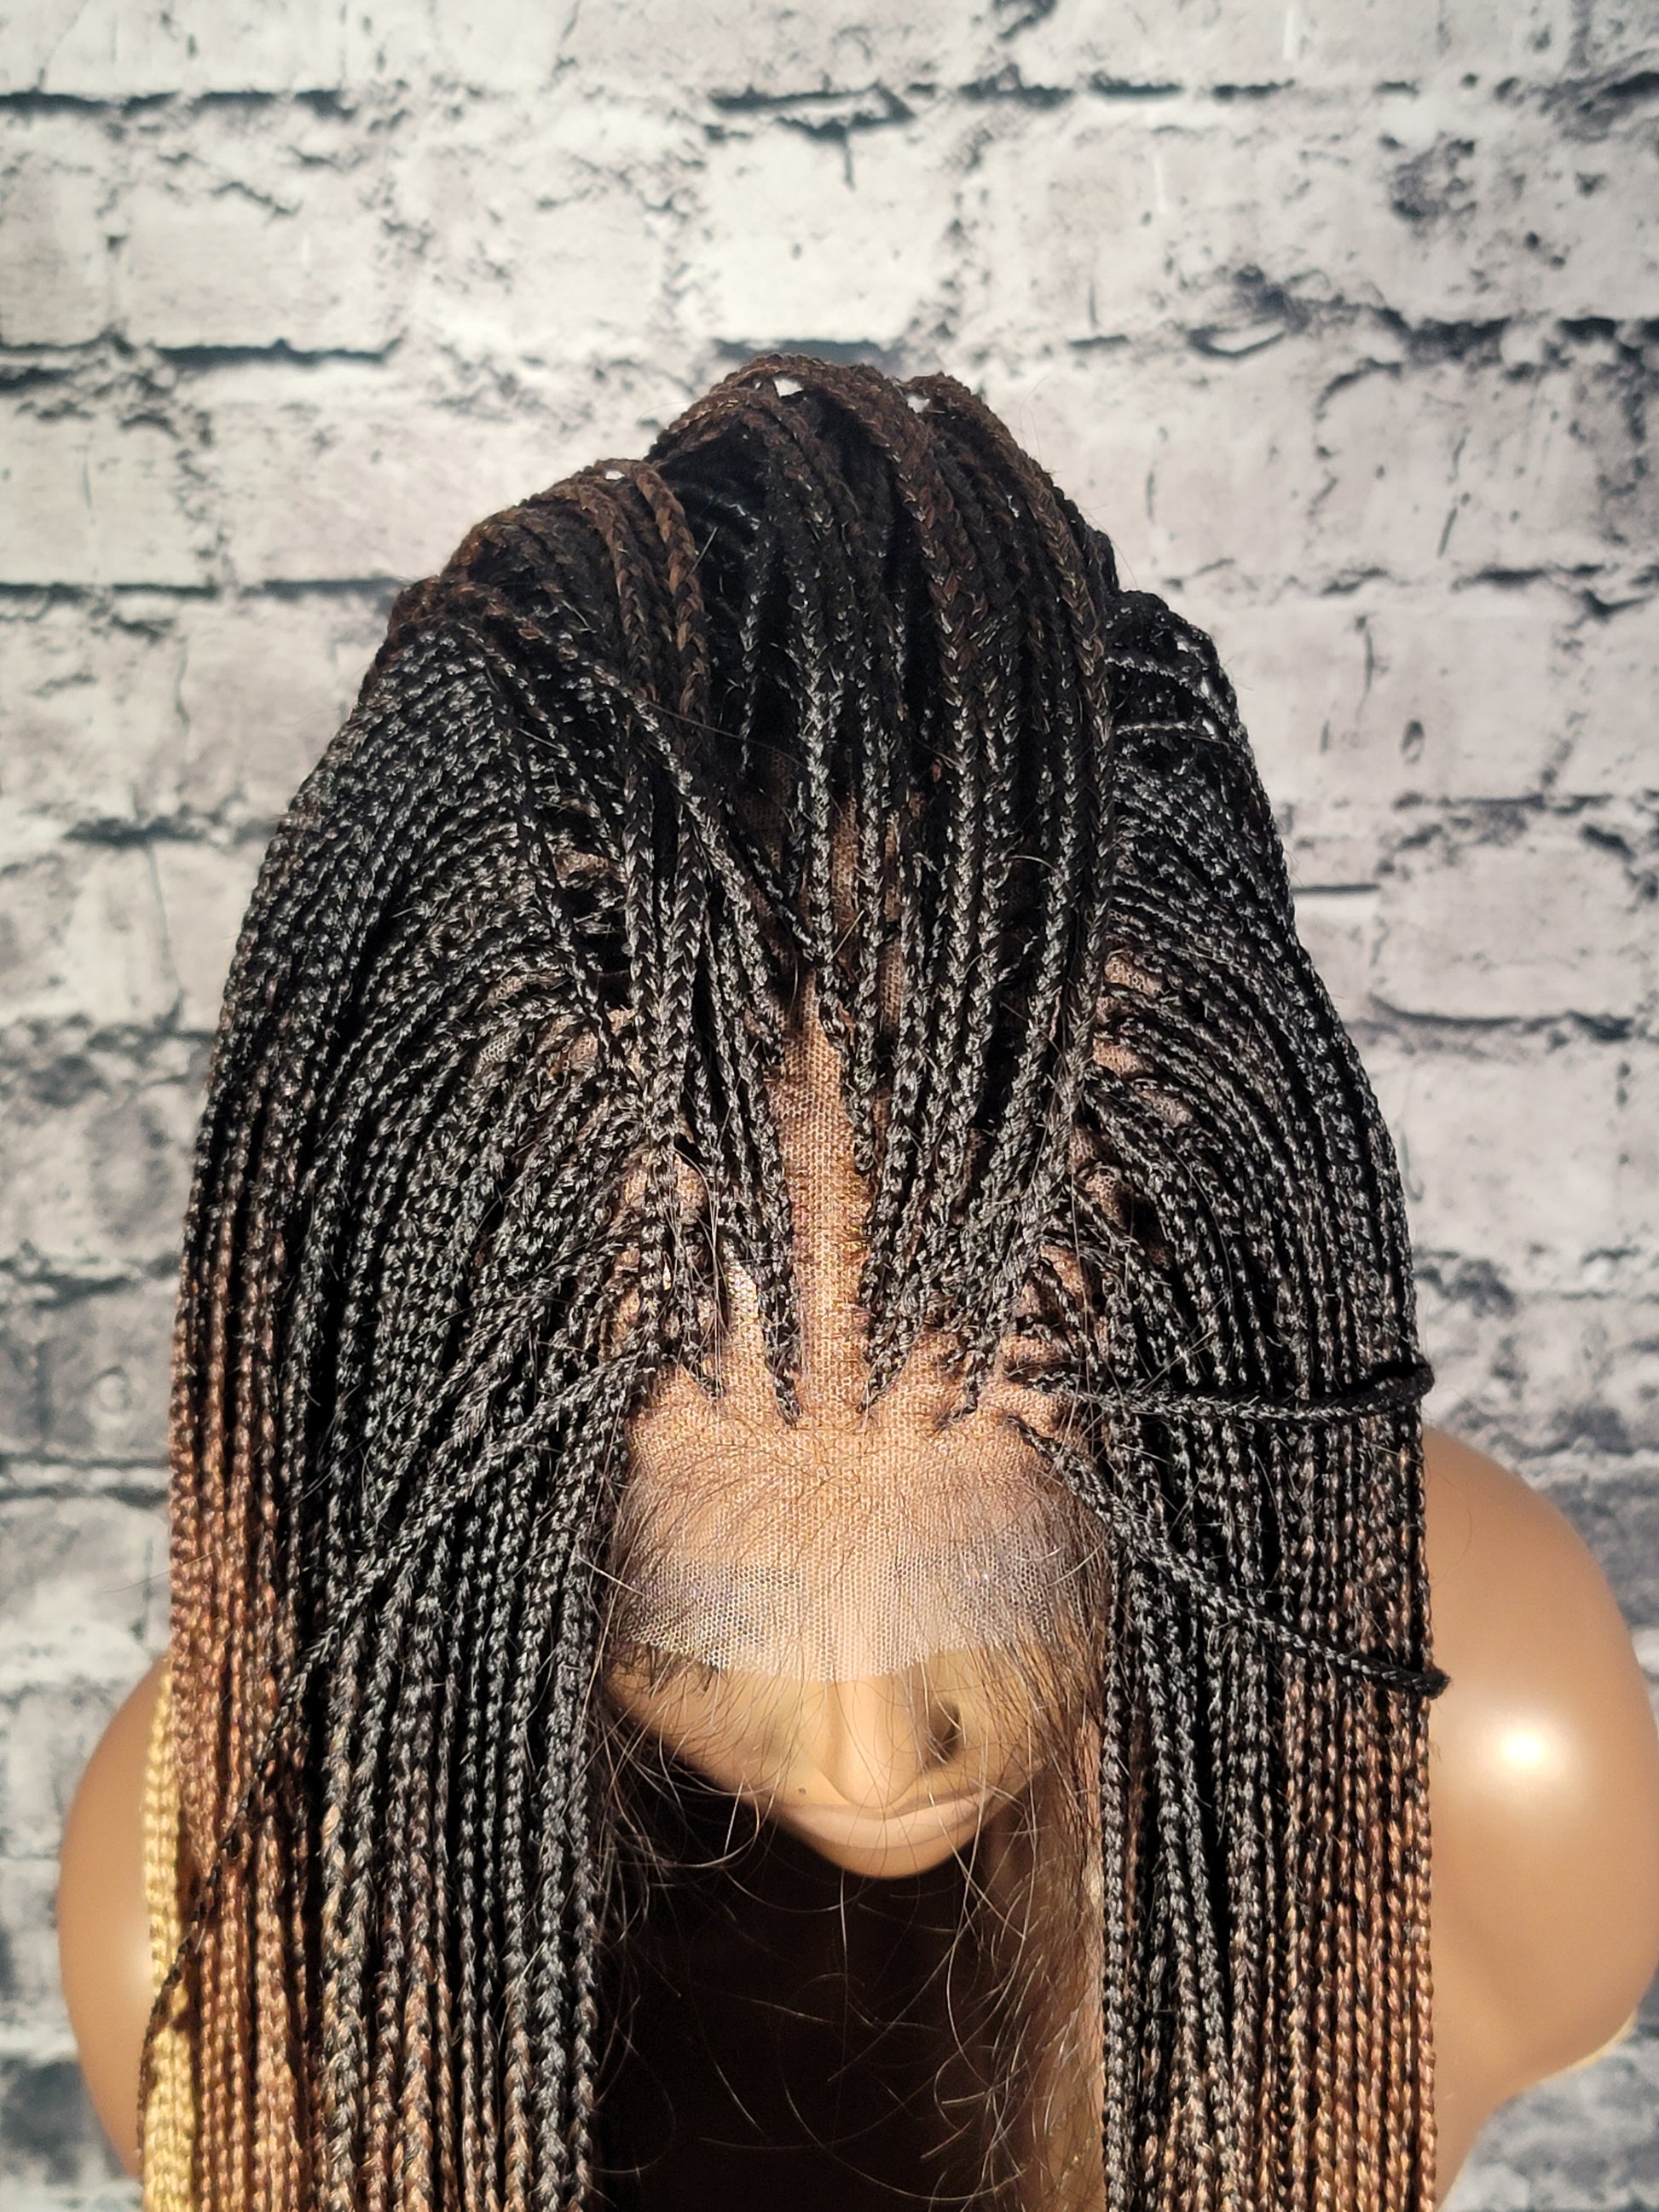 small knotless green and black knotless box braids